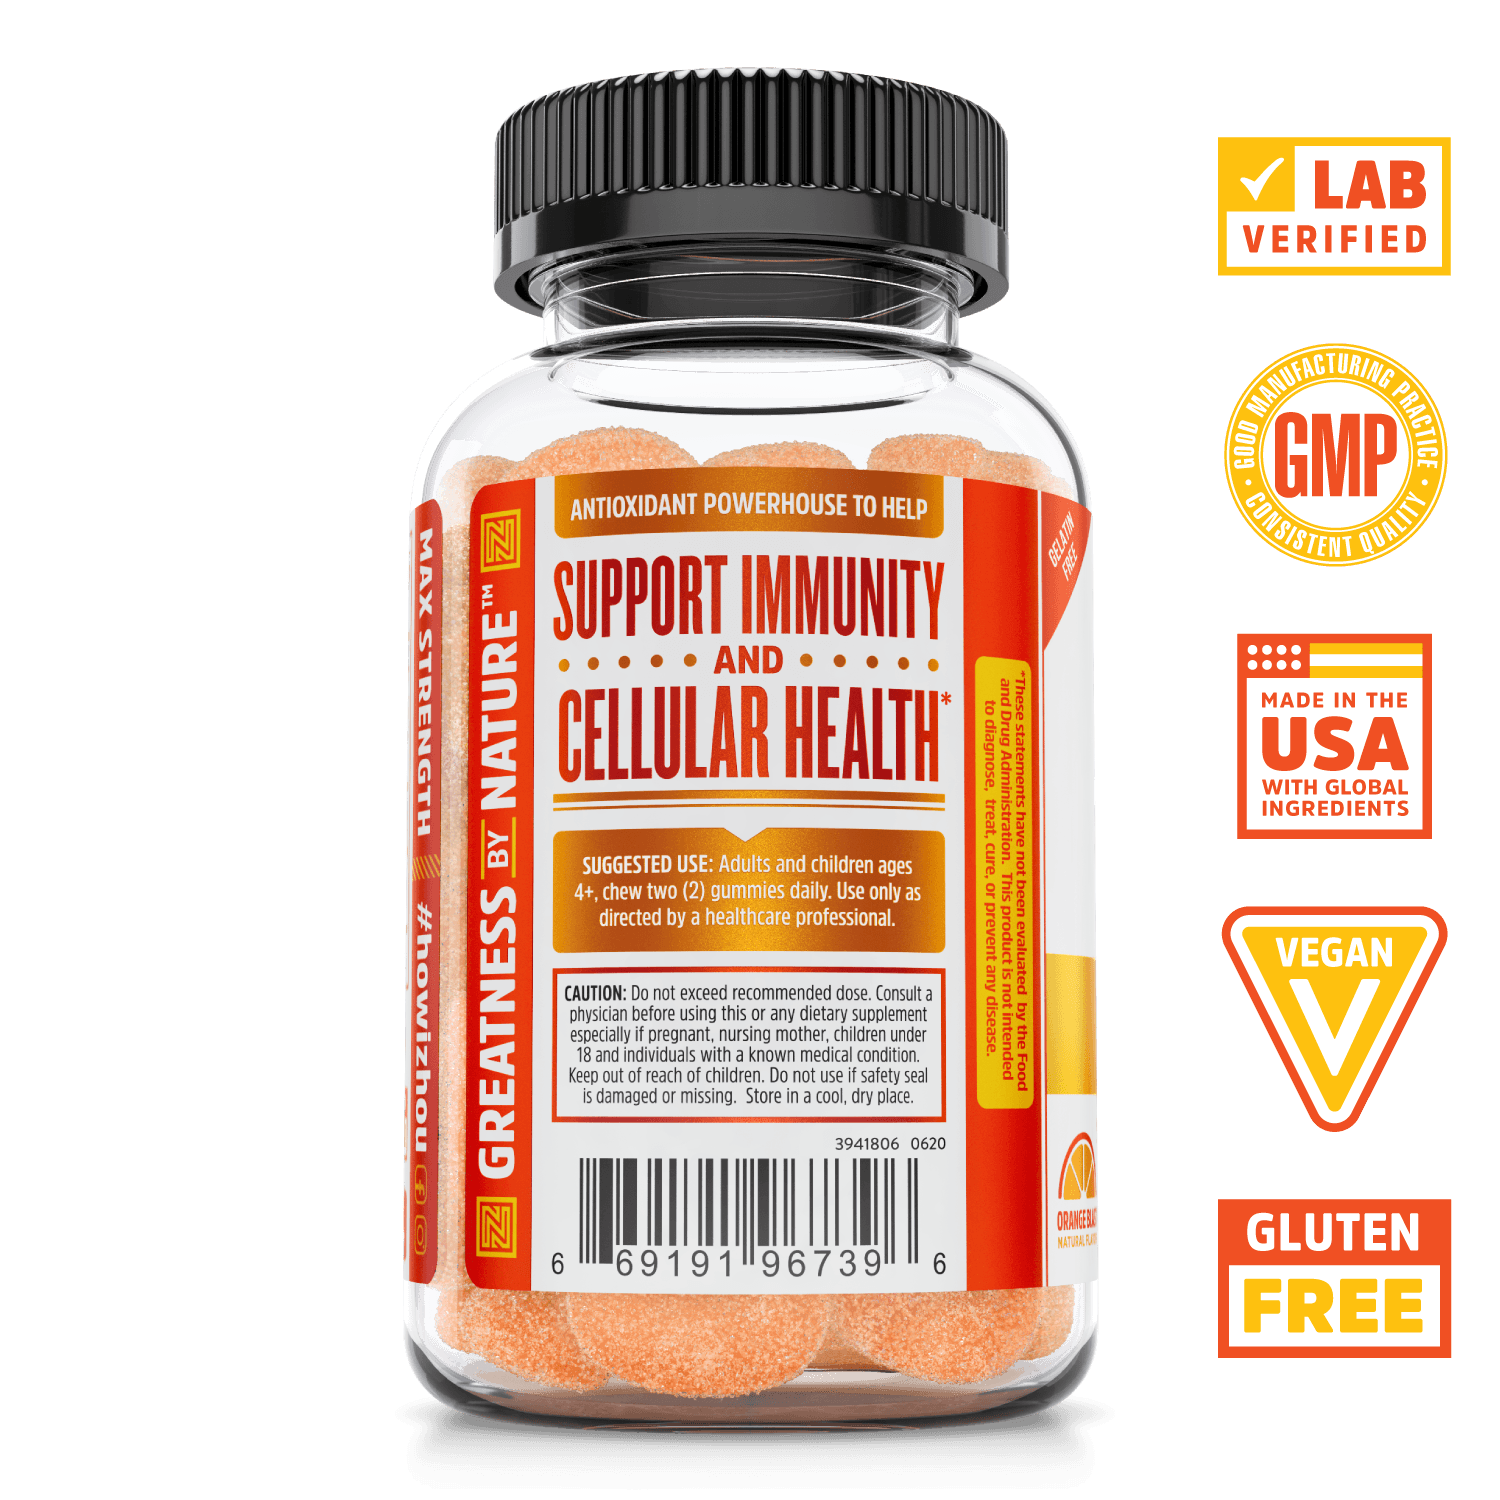 Zhou Nutrition Max Strength Vitamin C+ Gummies.  Bottle side. Lab verified, good manufacturing practices, made in the USA with global ingredients, vegan, gluten free.